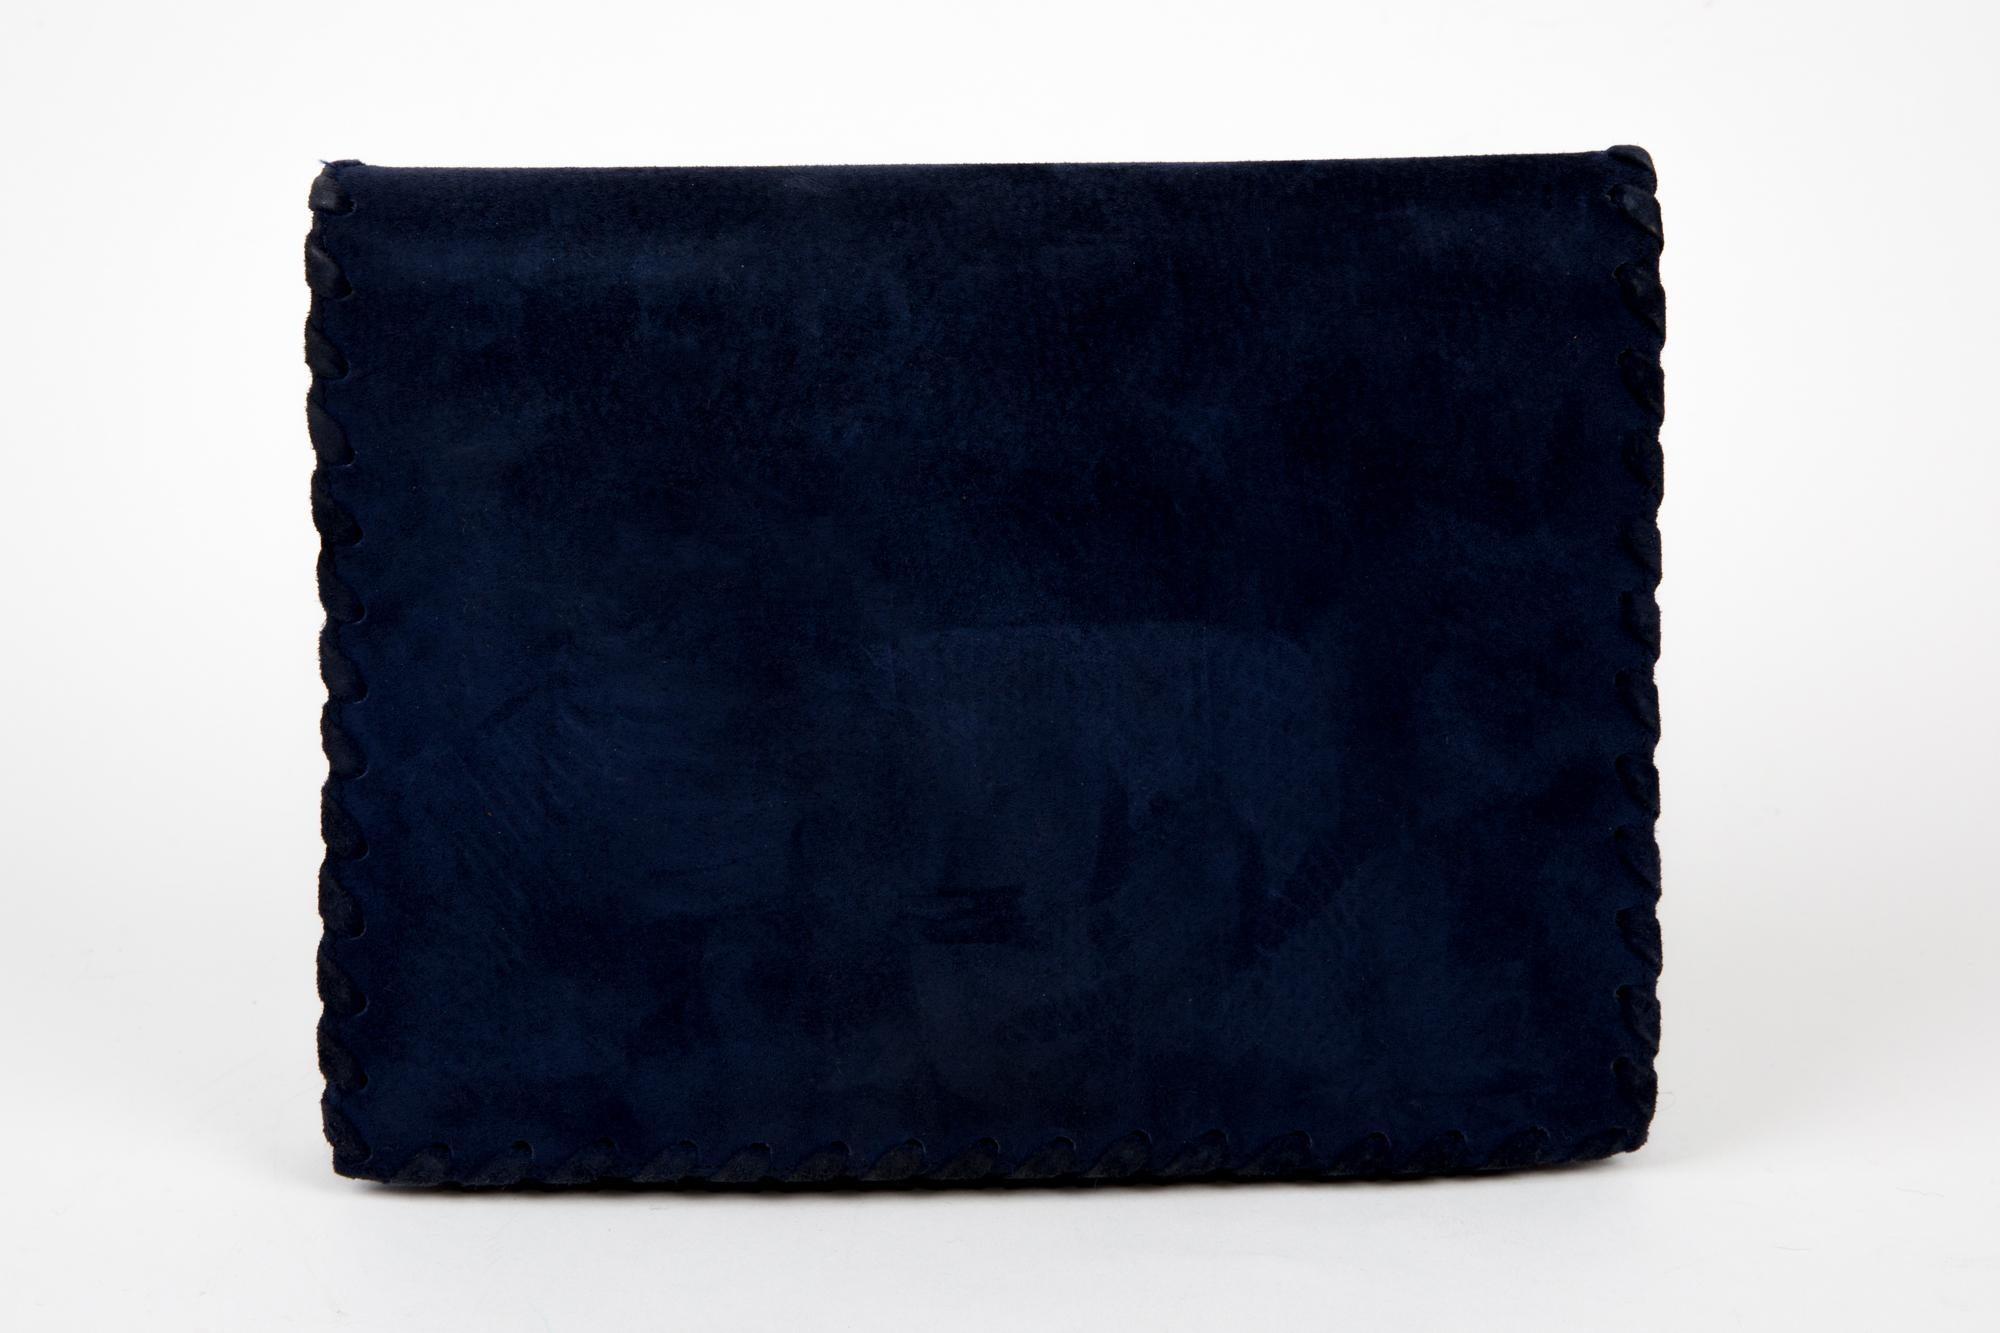 Sepcoeur Blue Suede Leather Large Clutch Bag  In Good Condition For Sale In Paris, FR